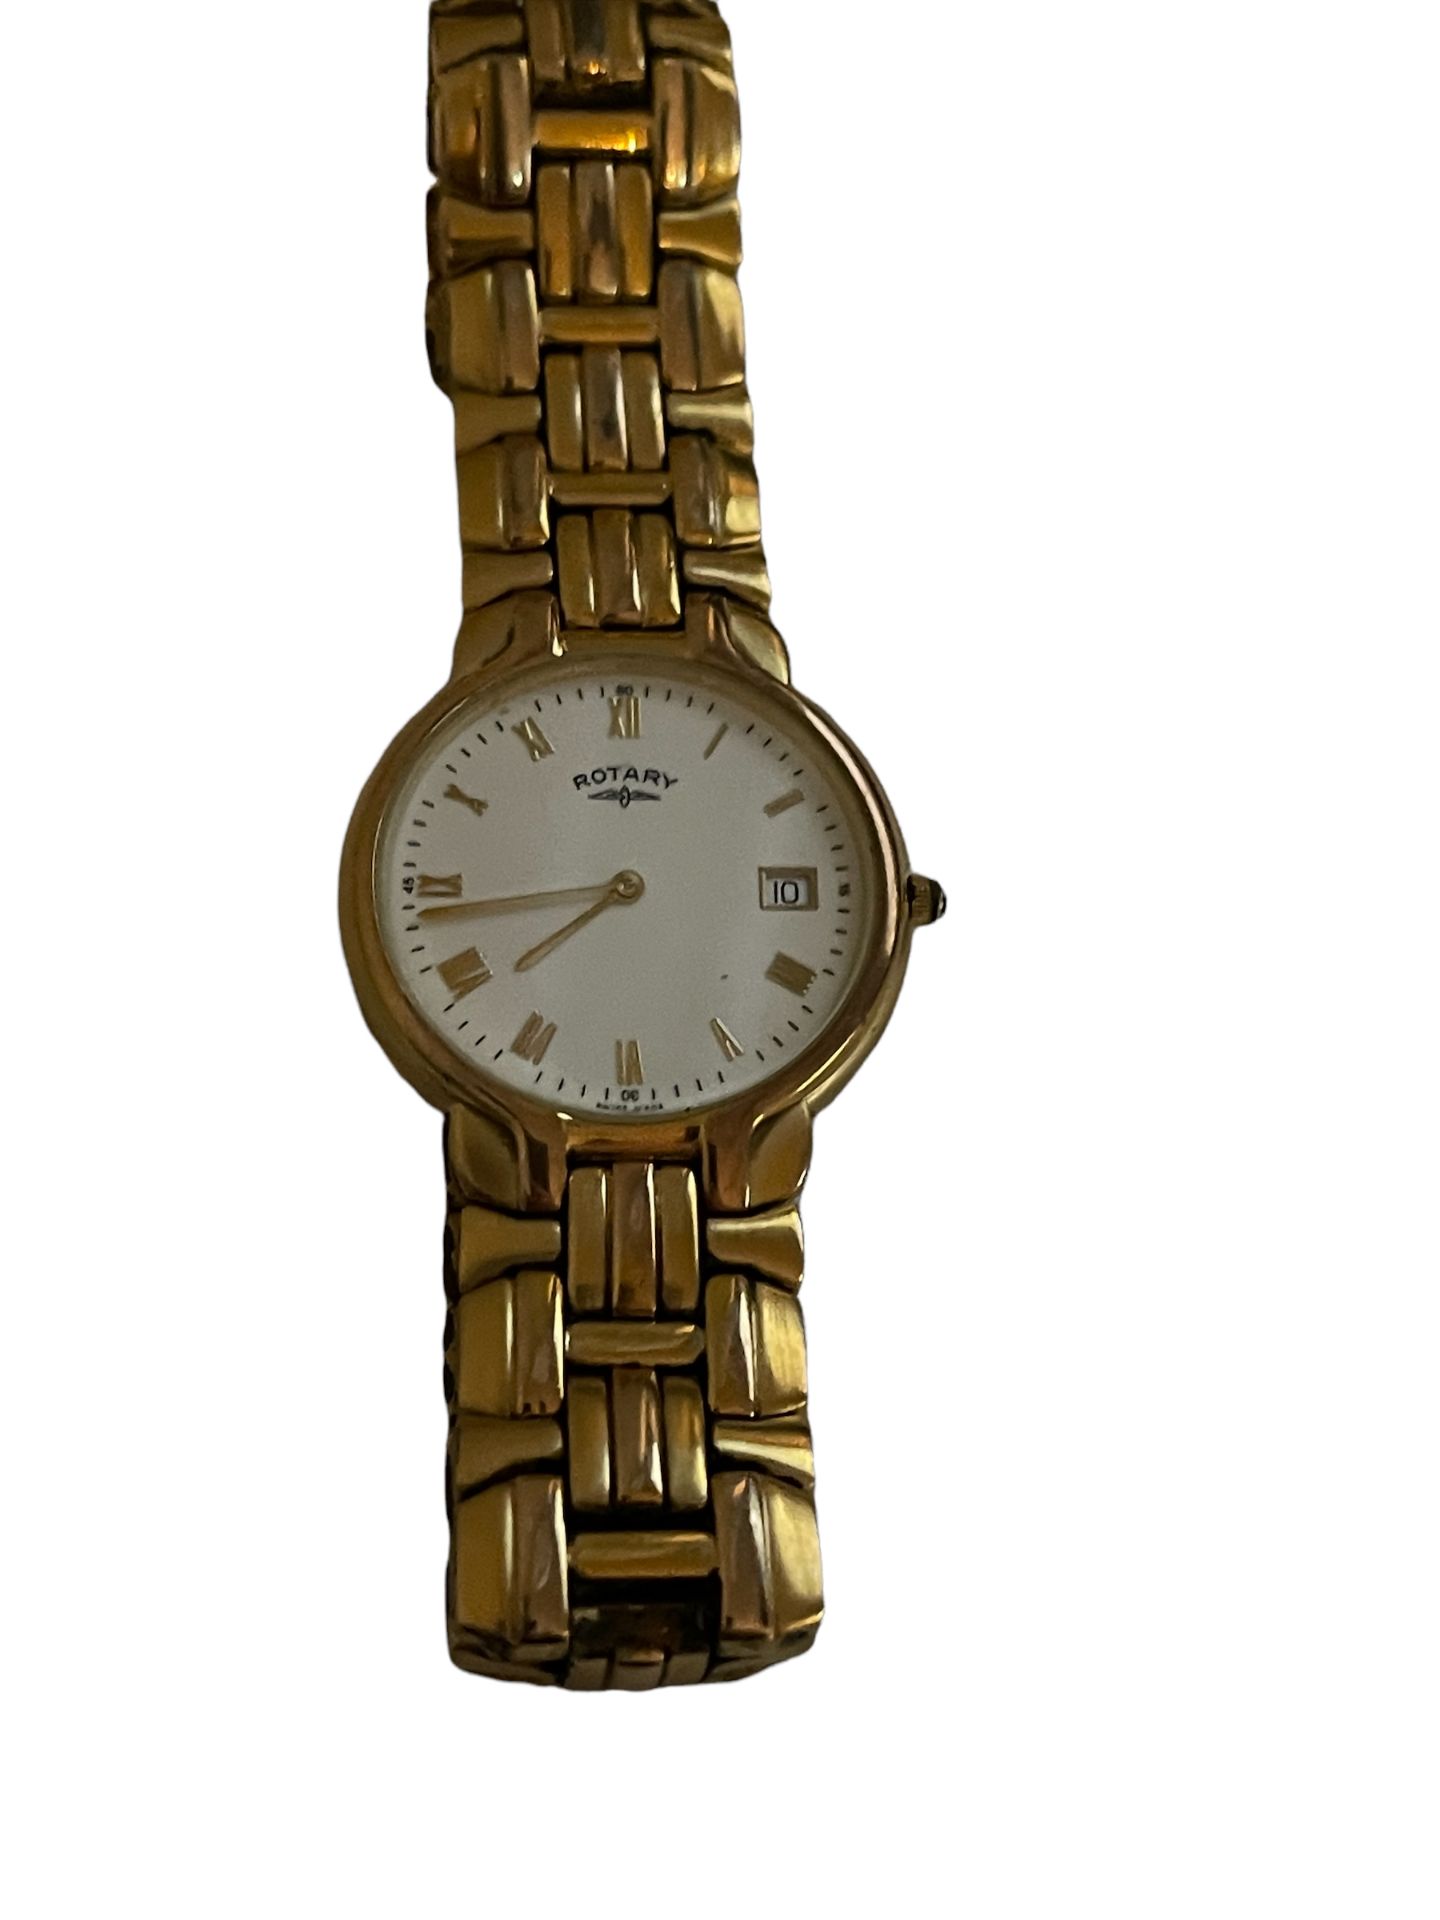 Mens Rotary Gold Plated Watch - Return Stock from our Private Jet Charter